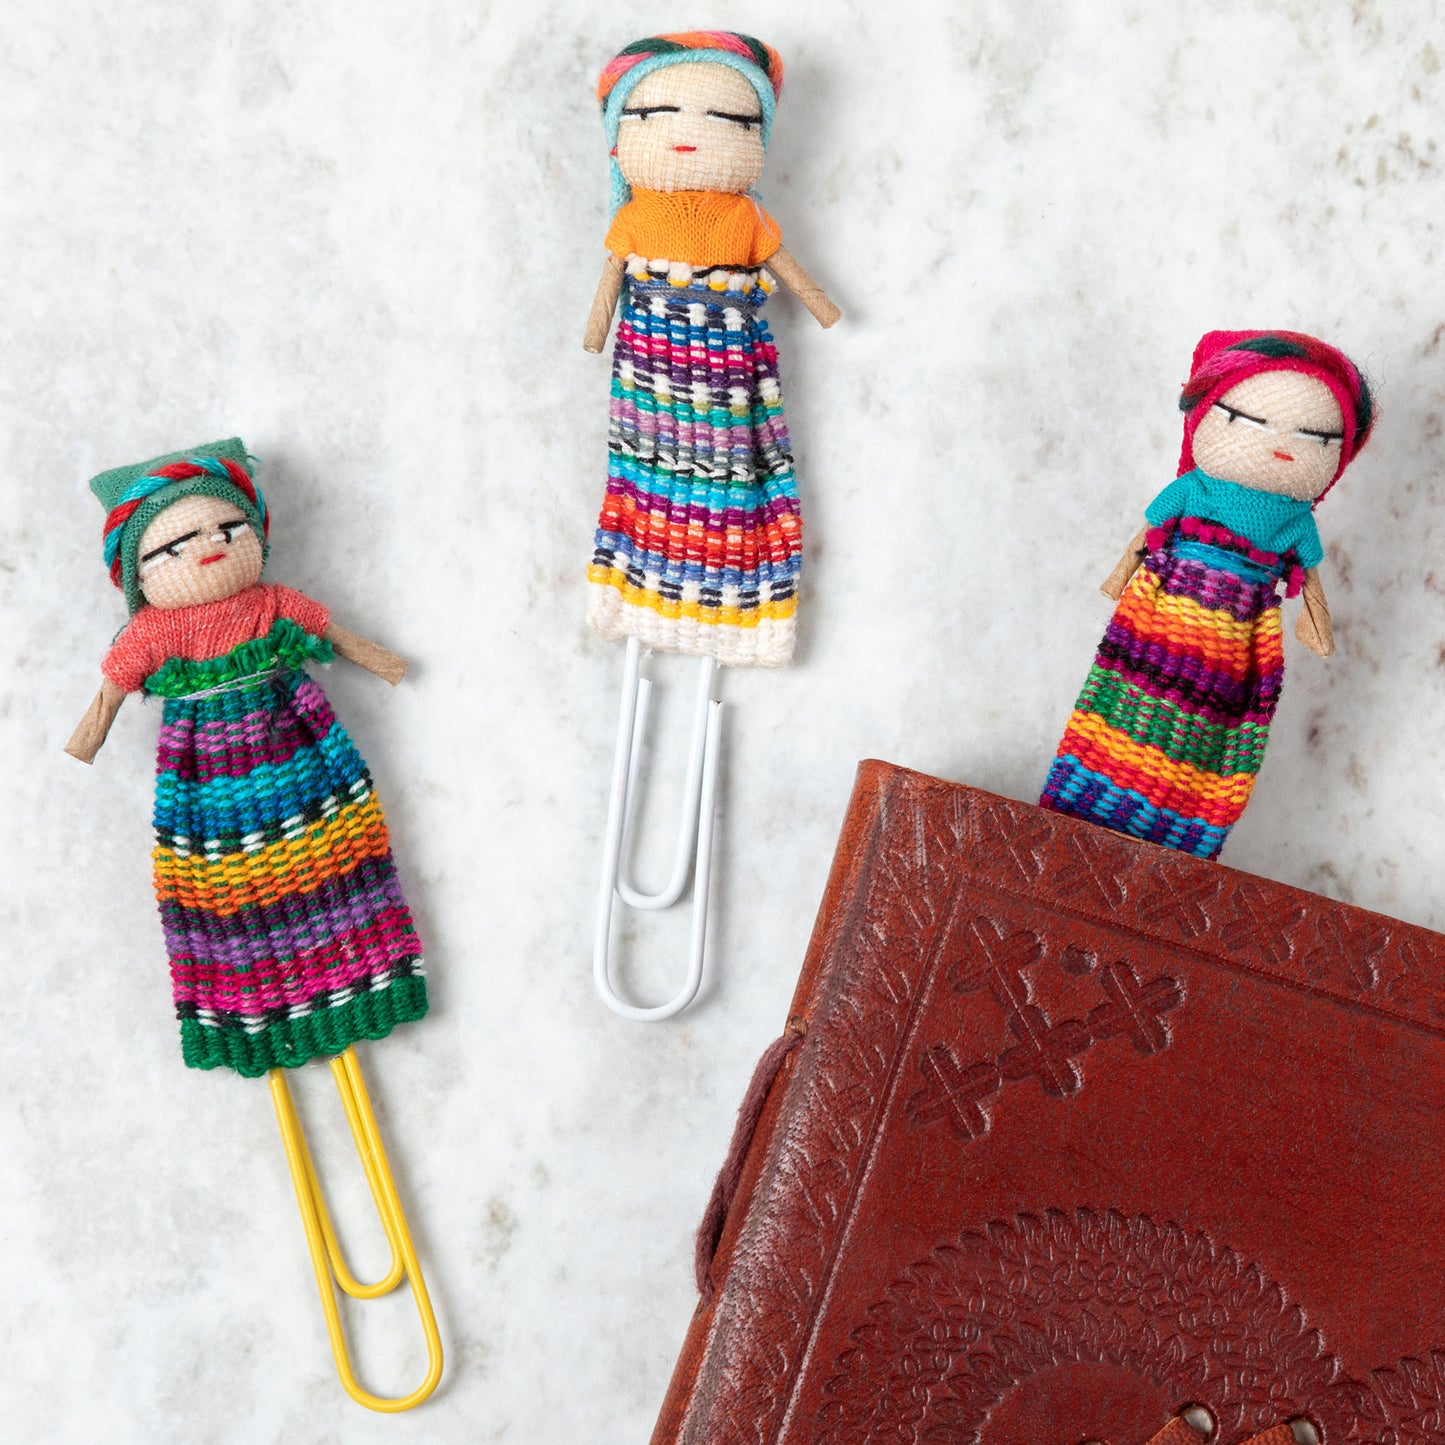 Worry No More Dolls Paper Clips - Set of 6